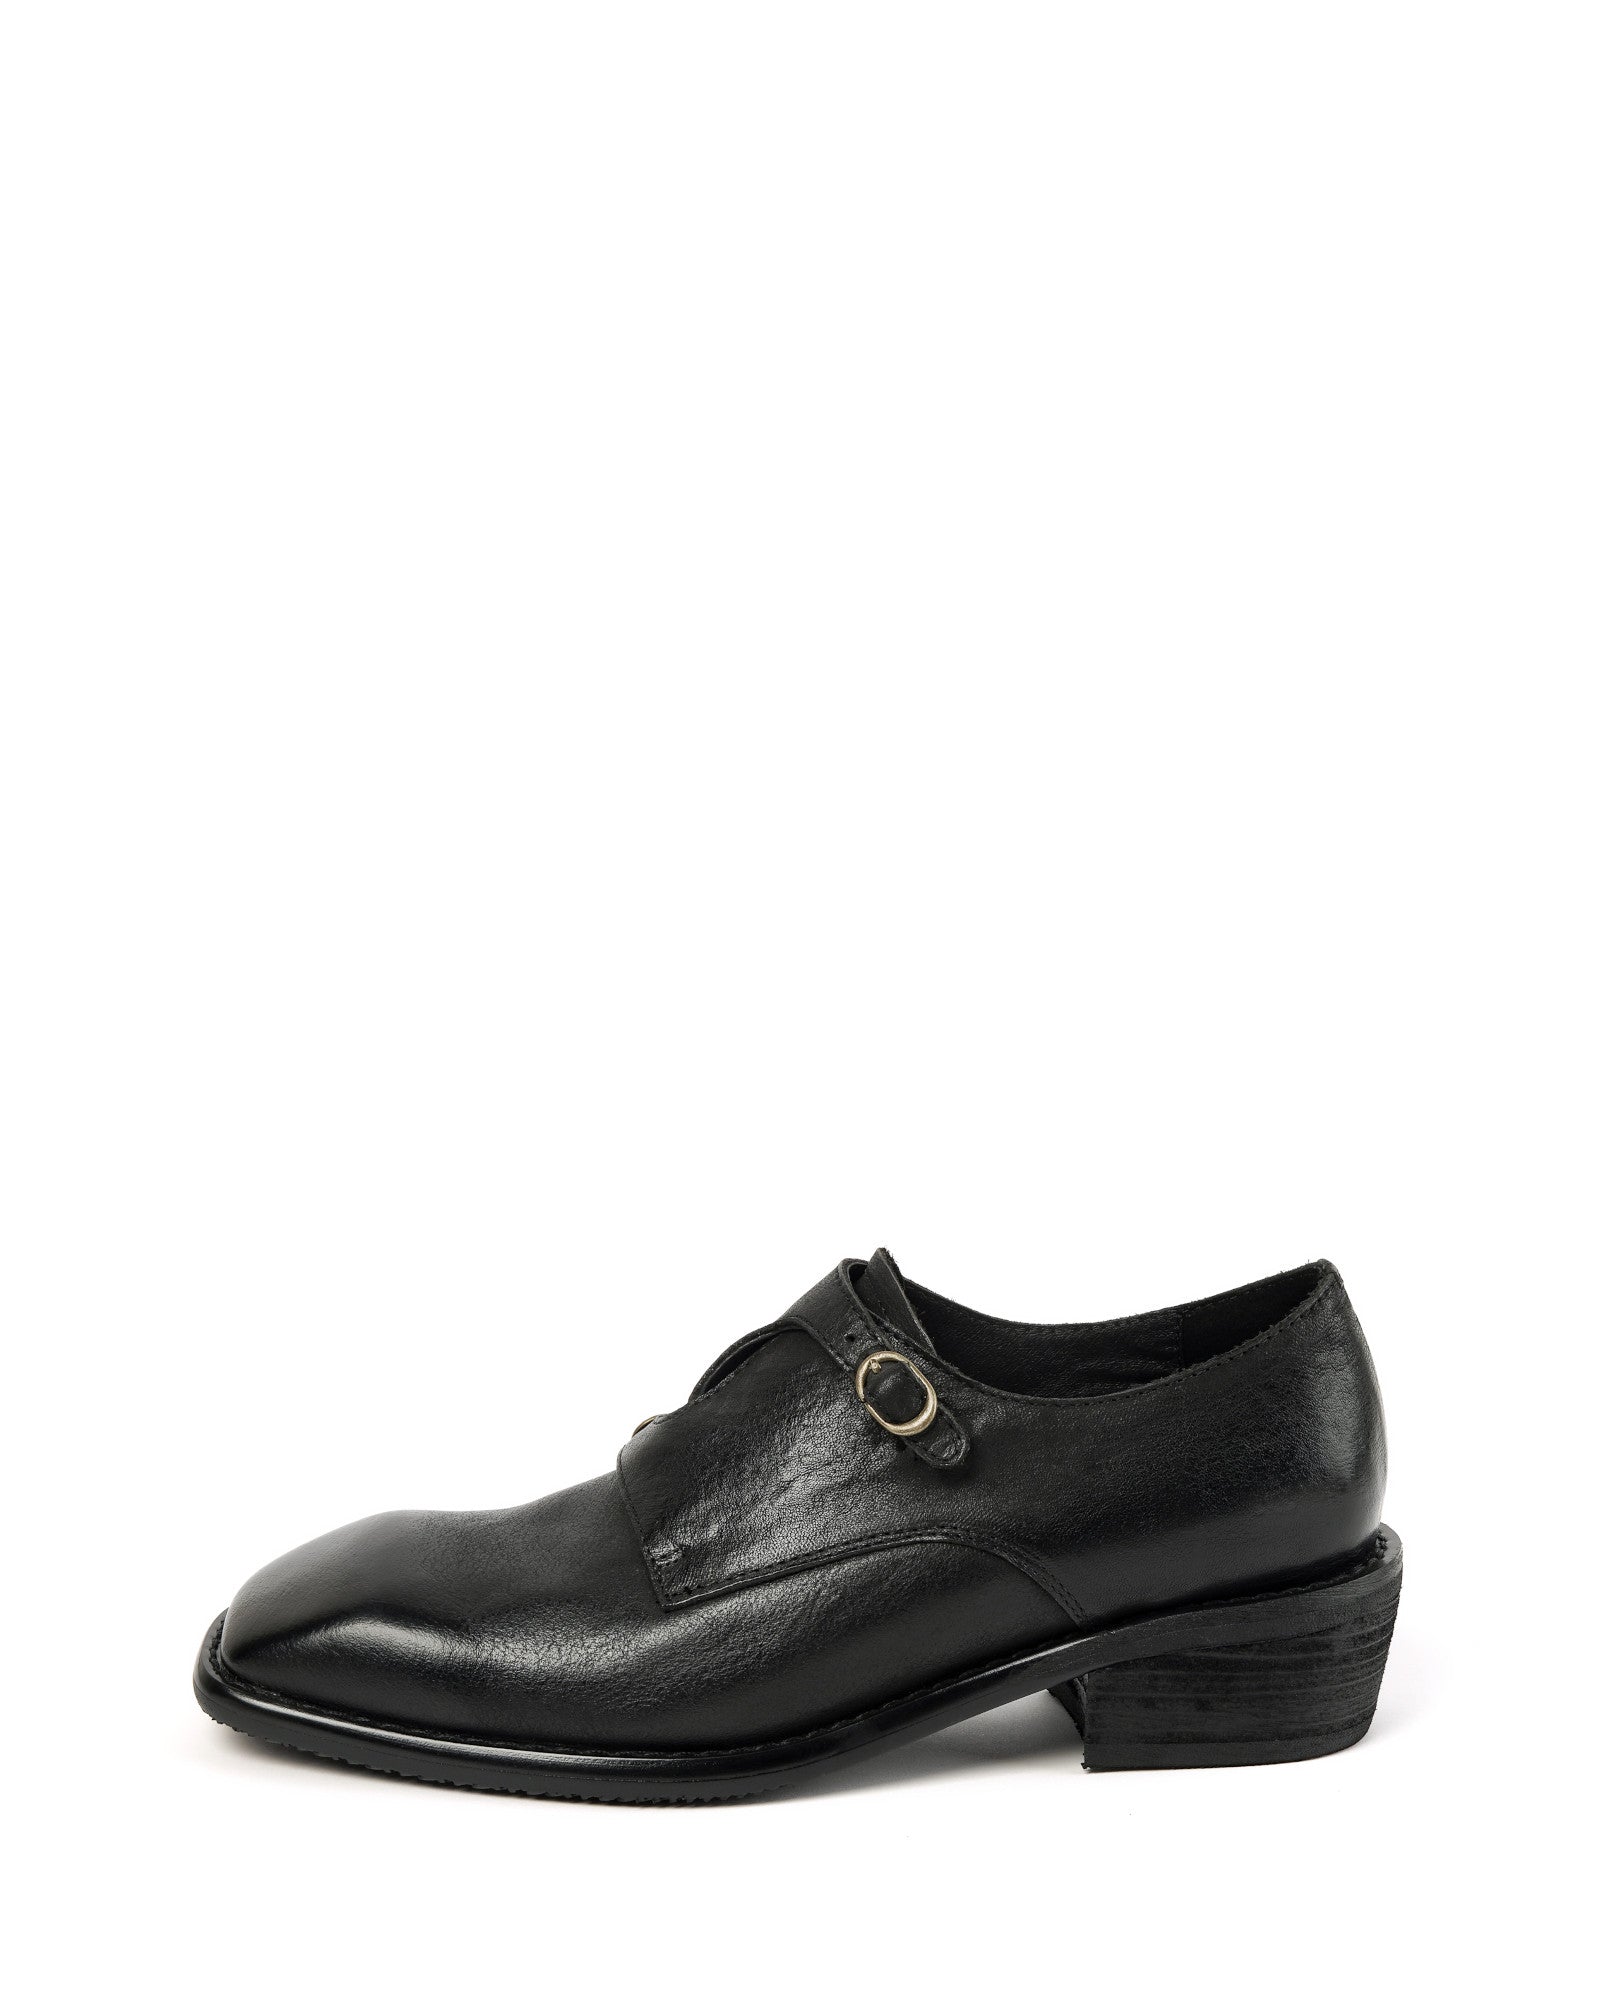 311-monk-style-leather-loafers-black-1